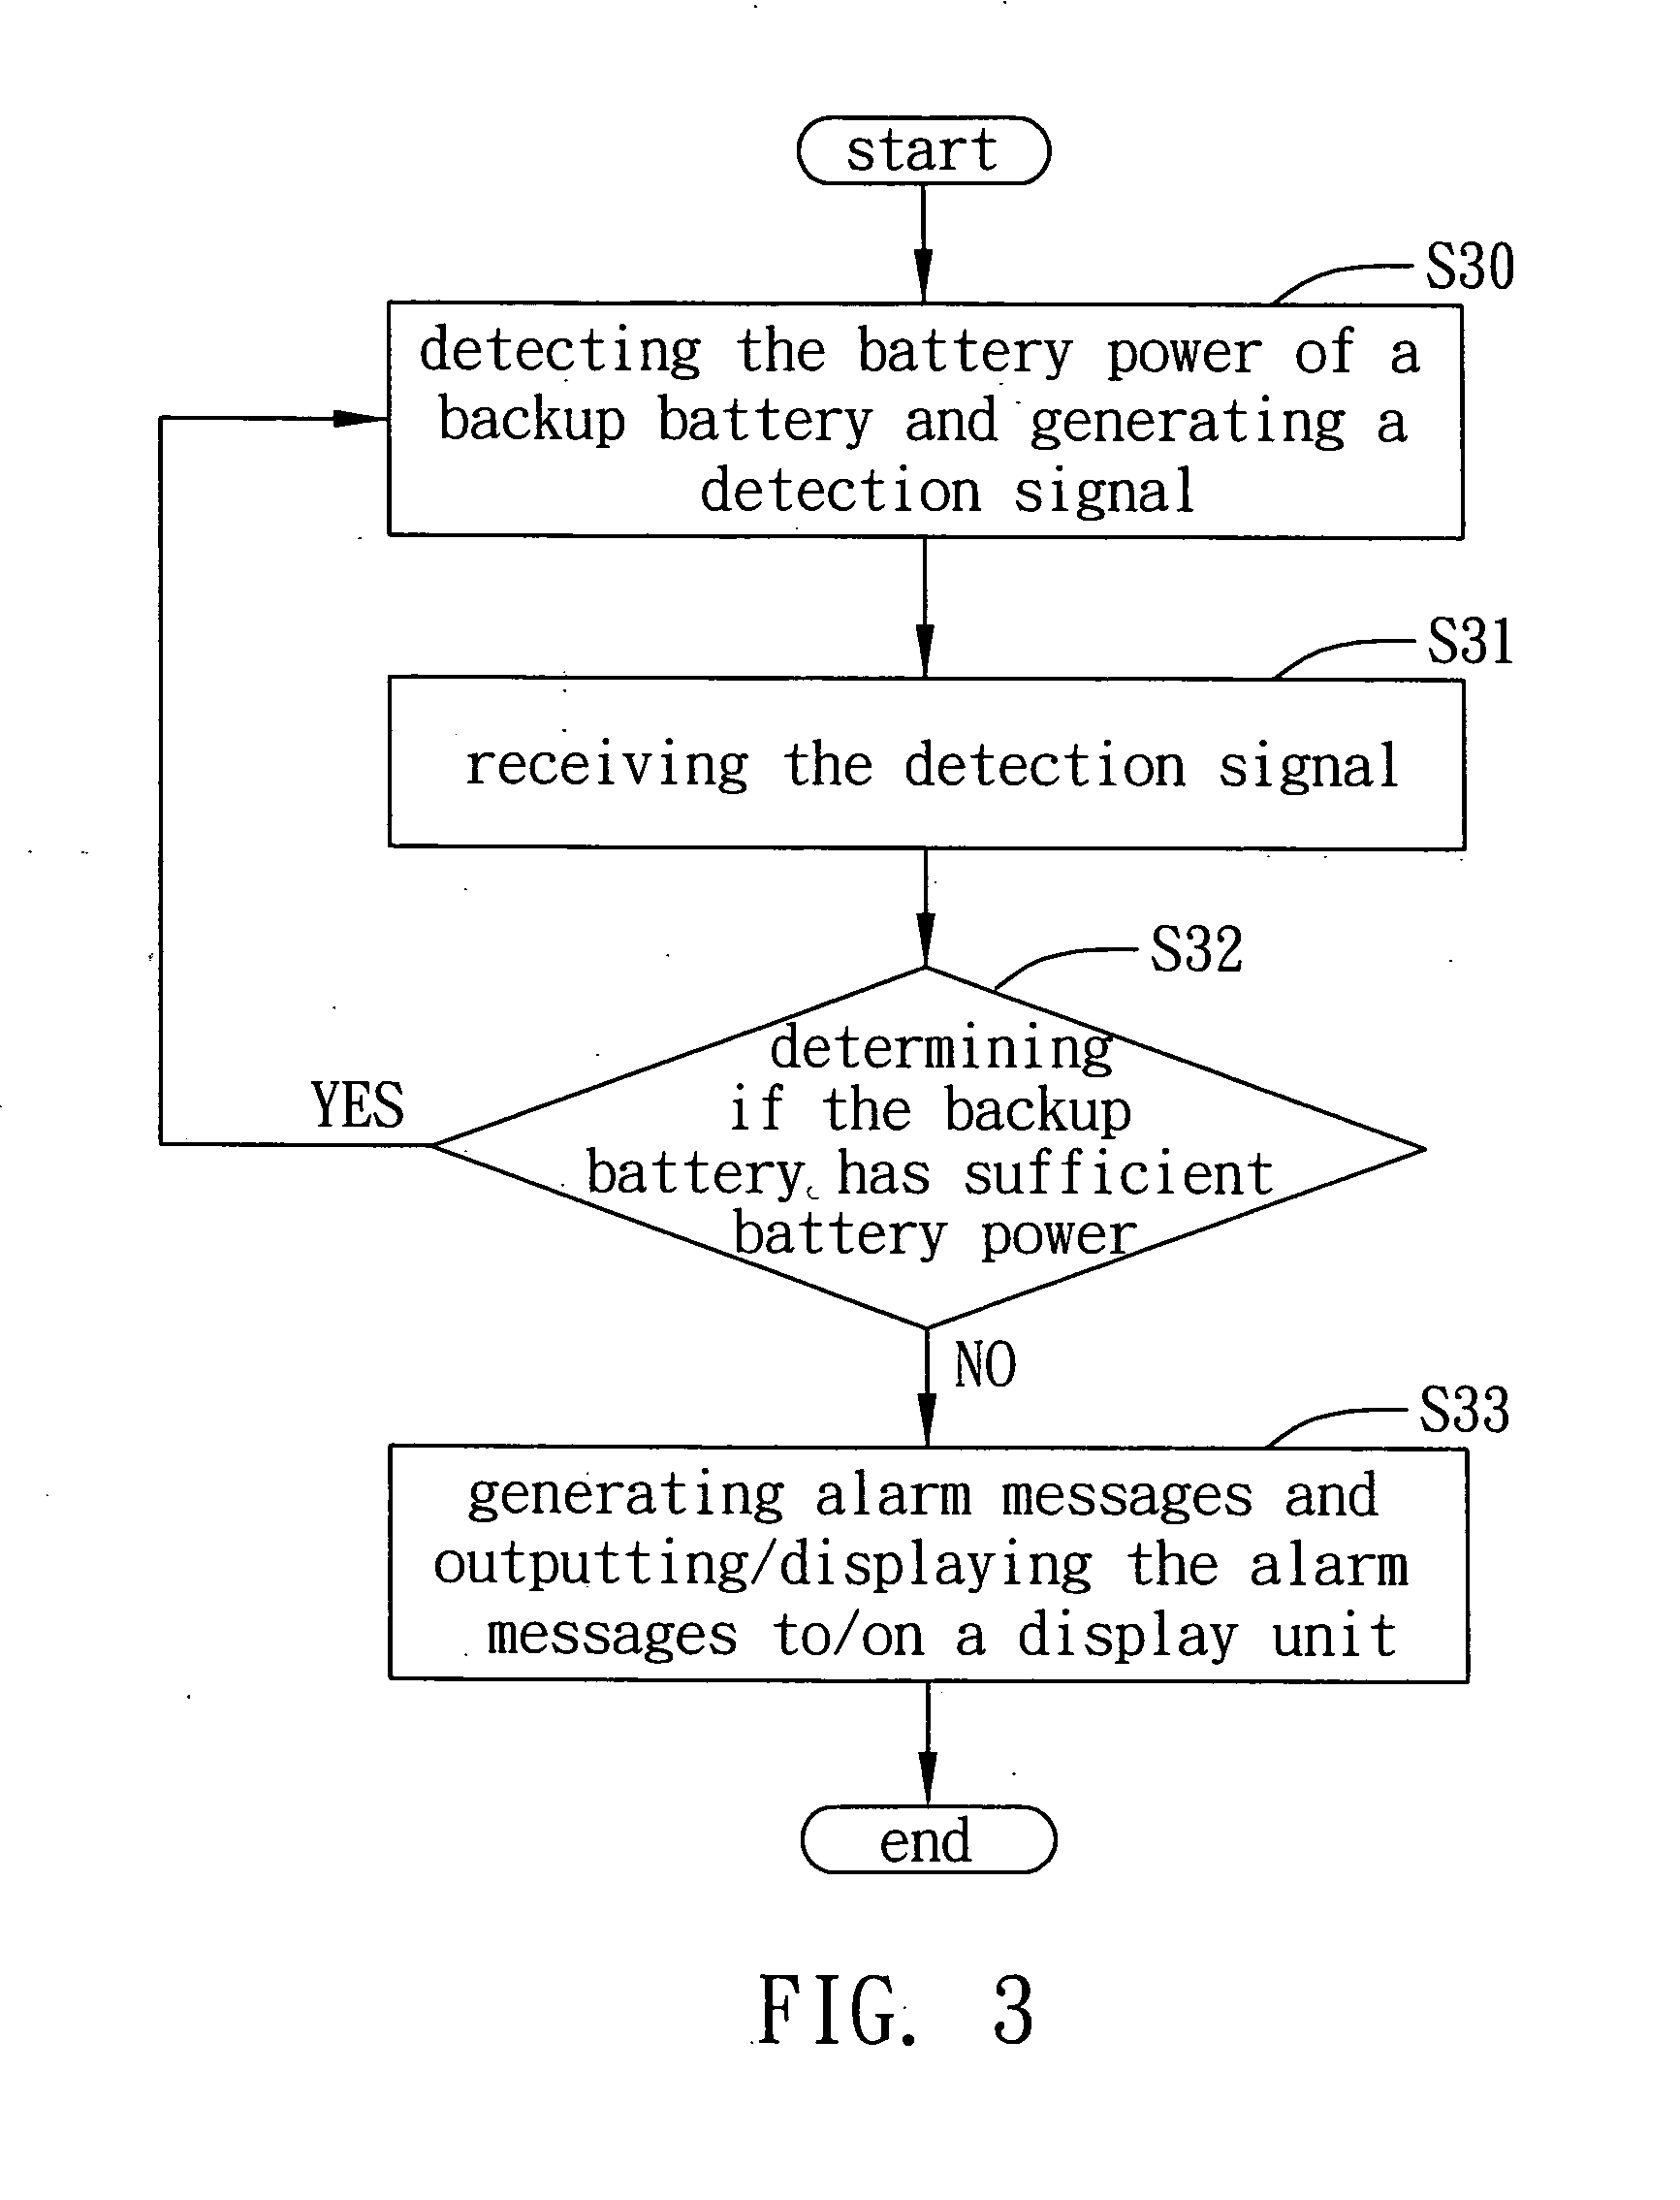 Battery power detecting system and method